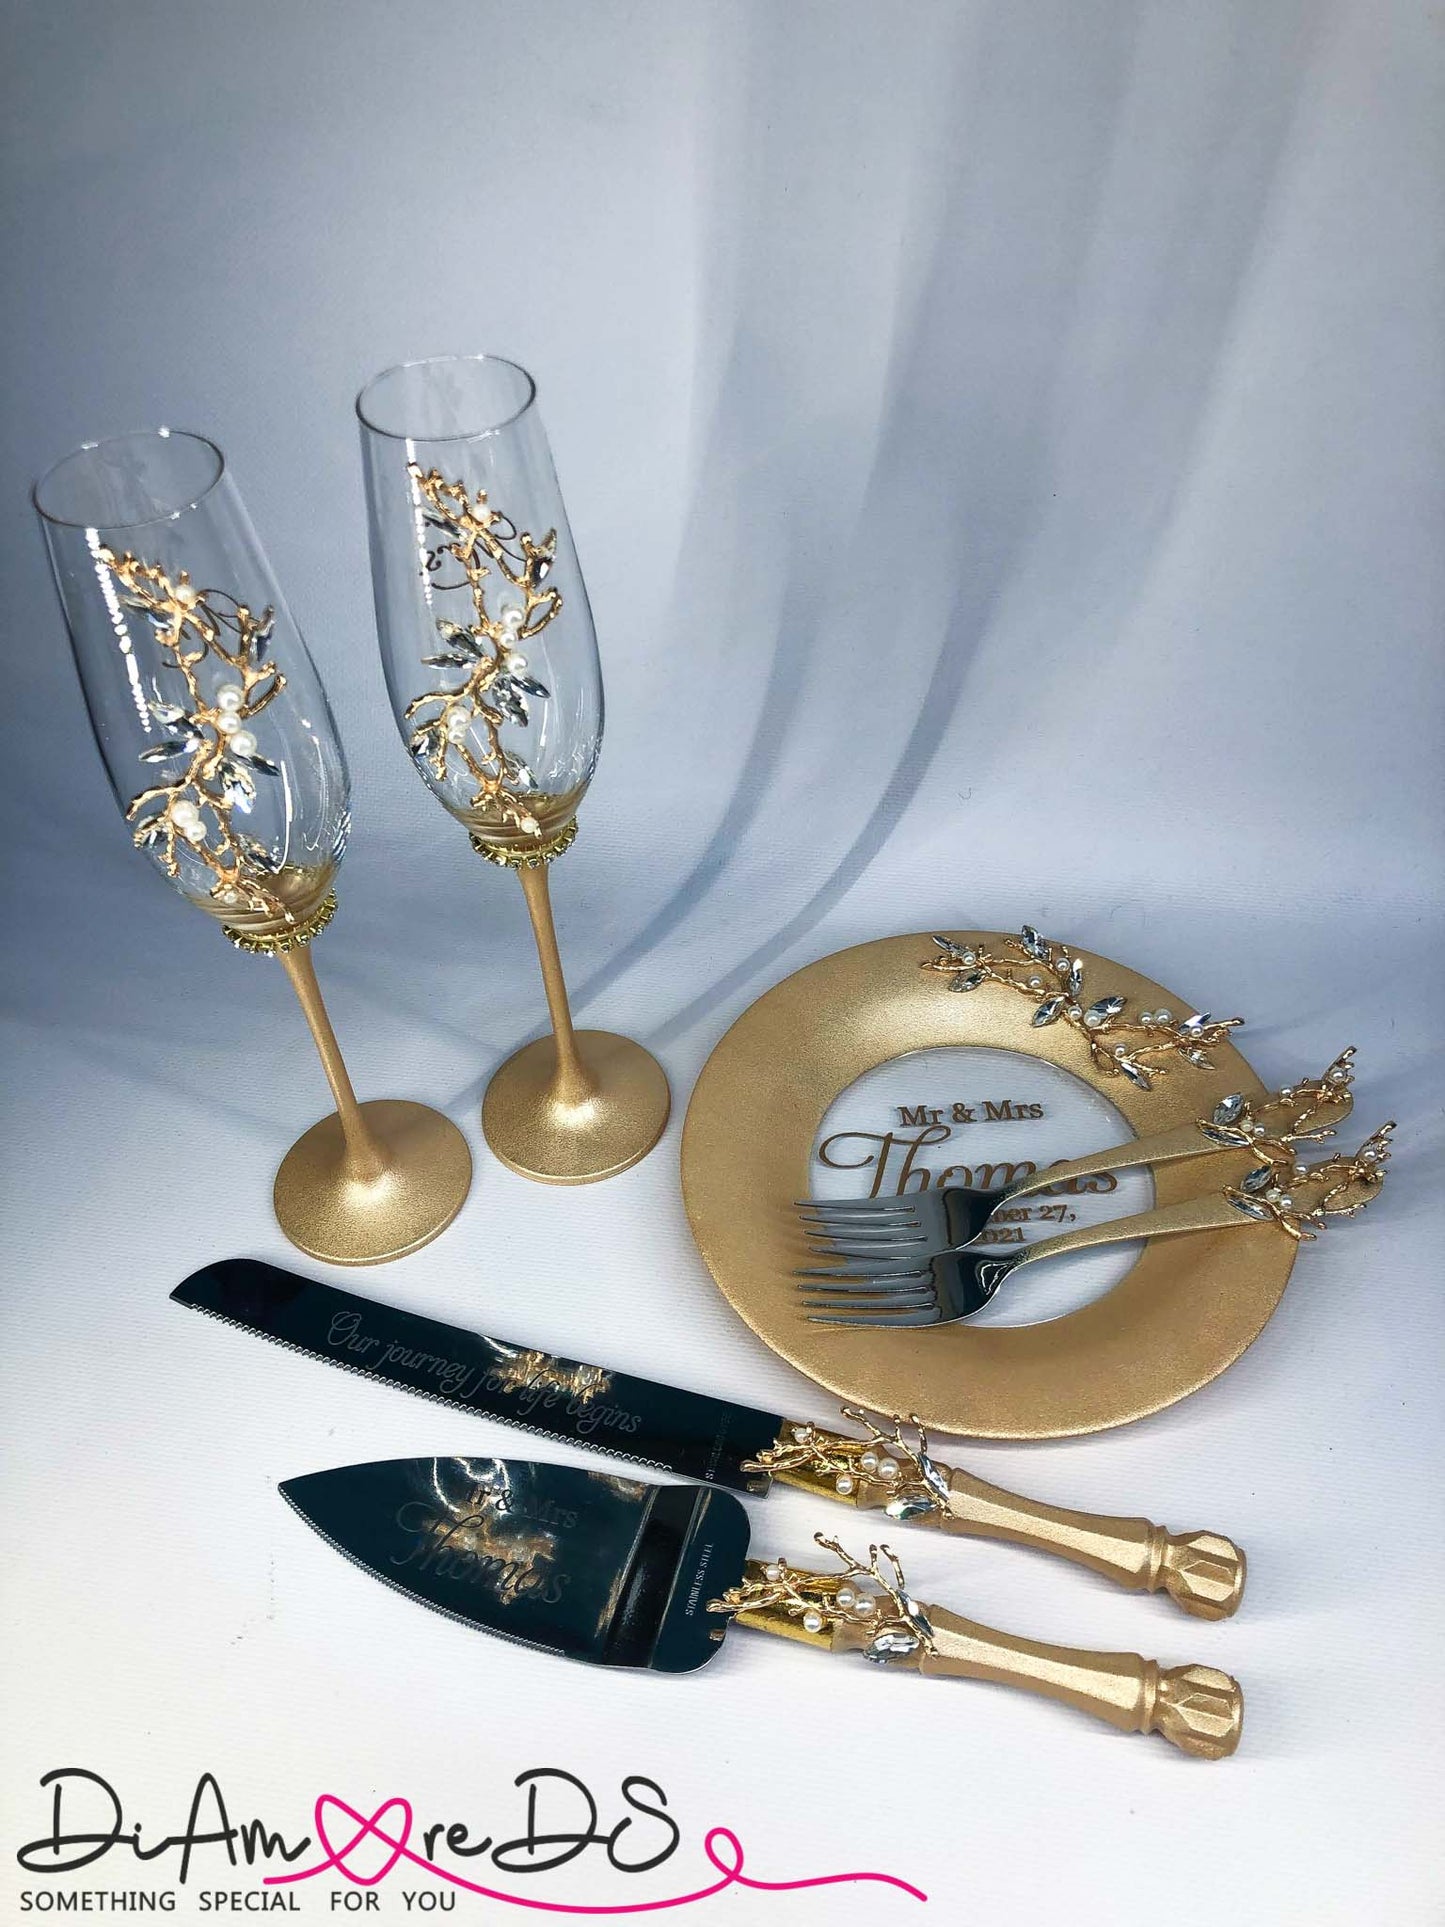 Golden wedding flutes to commemorate your love